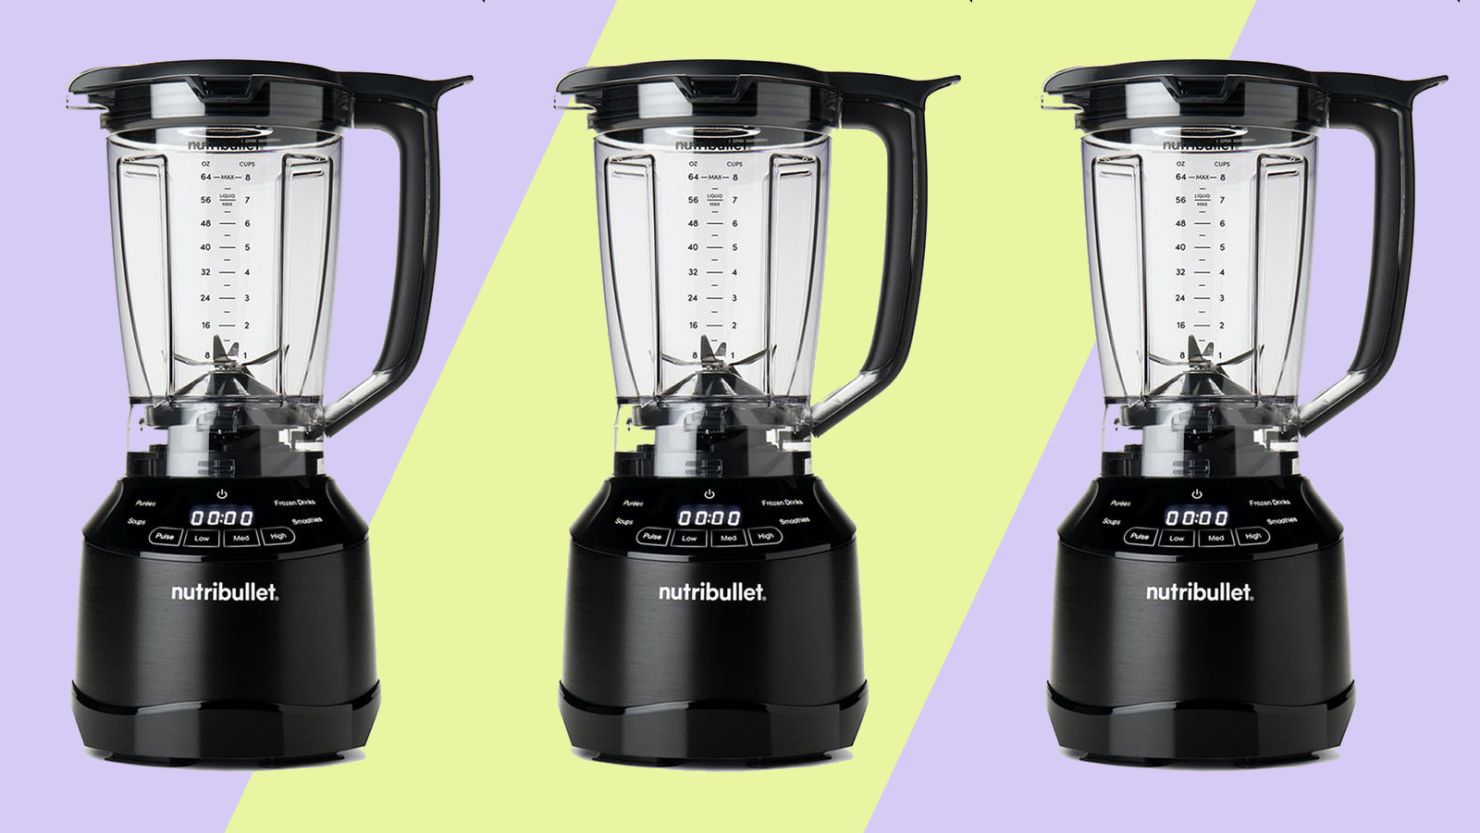 Glass vs Plastic: Which Blender Jar Is Better? - Cuisine at Home Guides